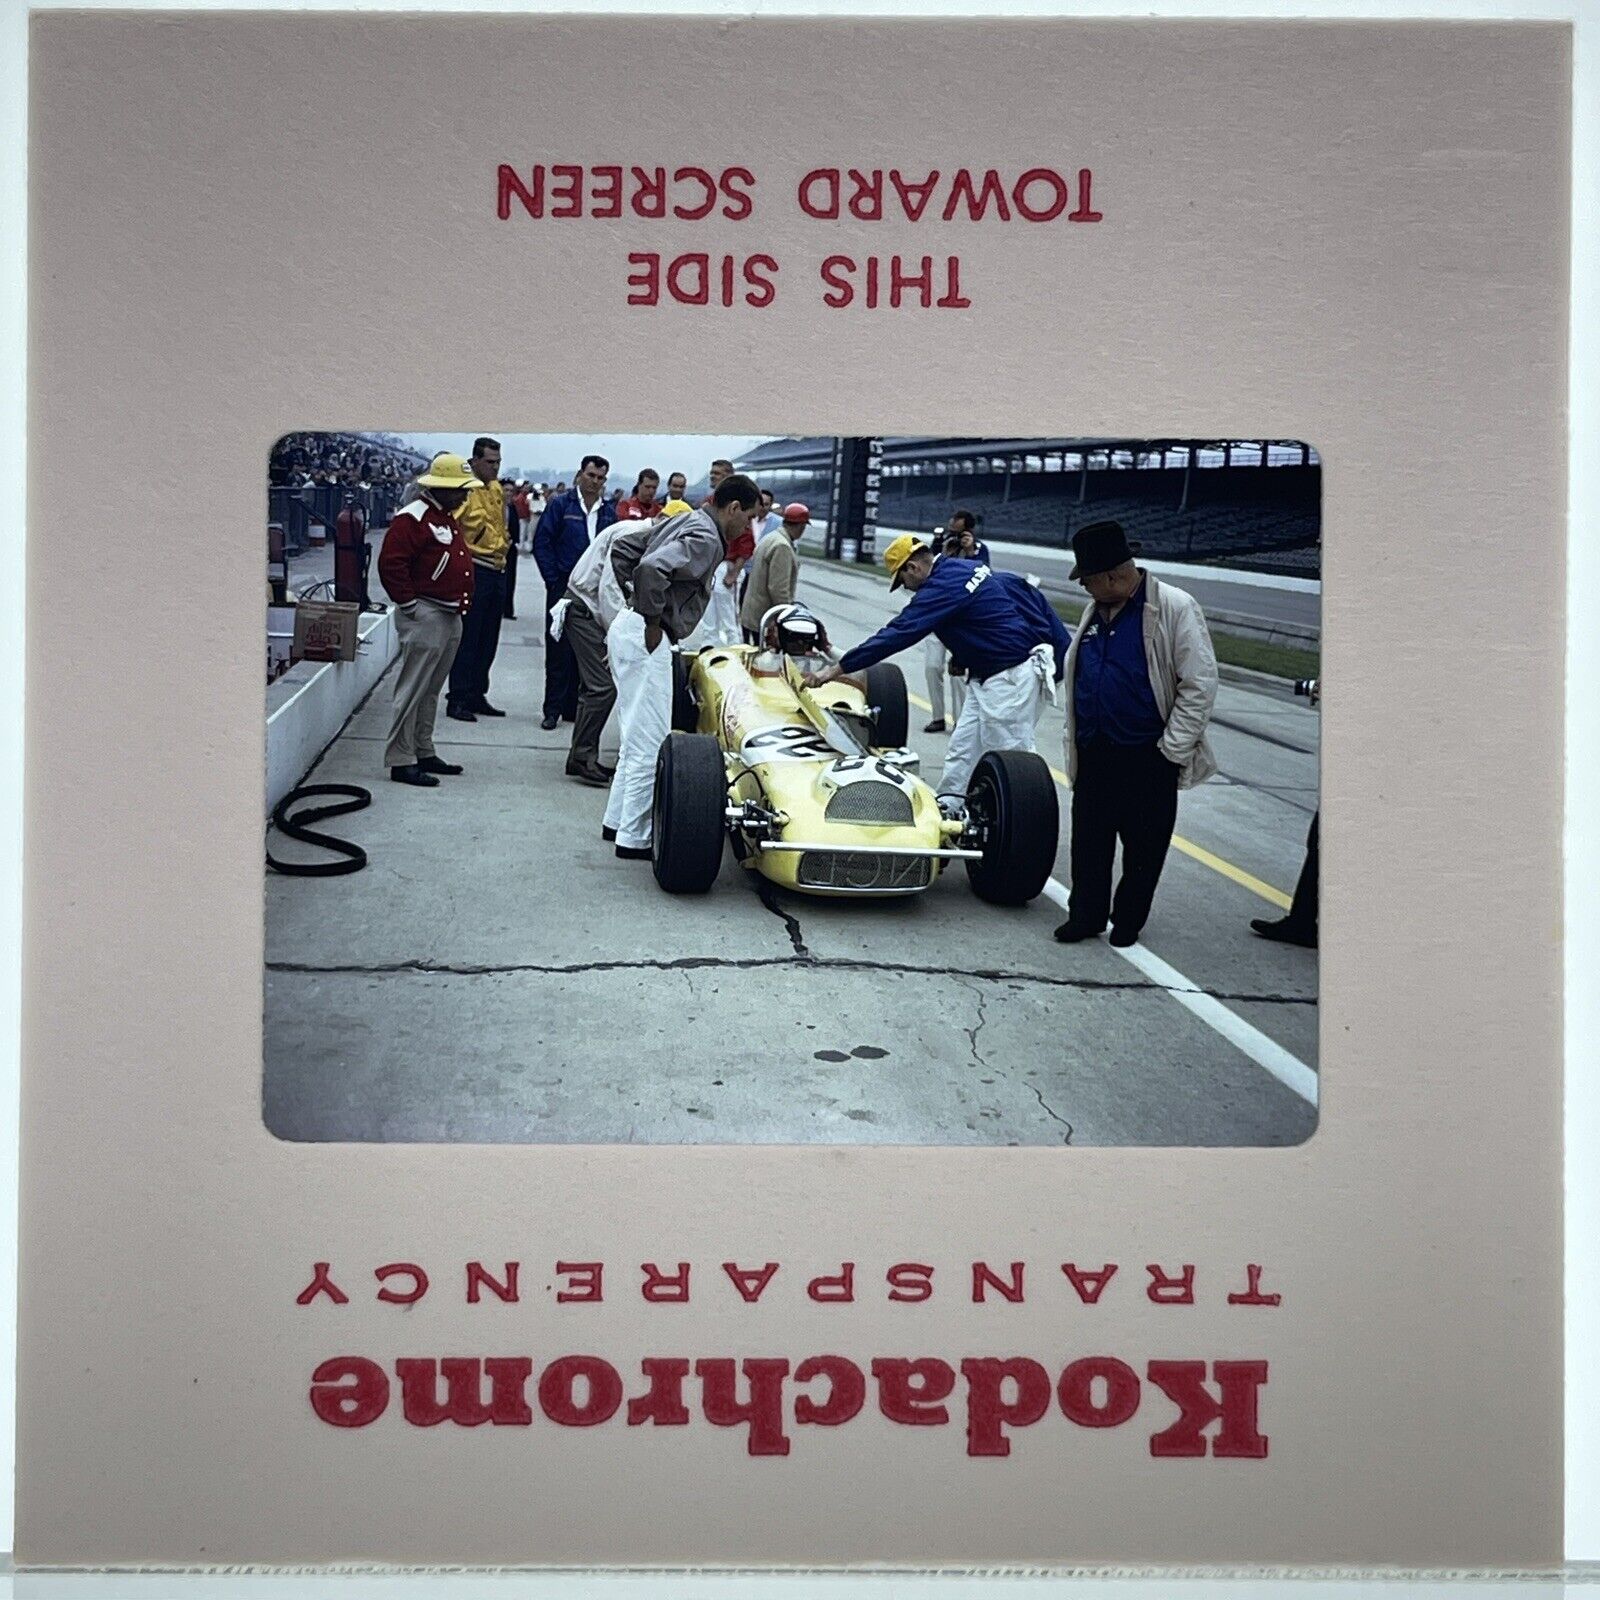 35mm Slide 1966 Indy Indianapolis 500 Vtg 60s Auto Racing Race Car 99